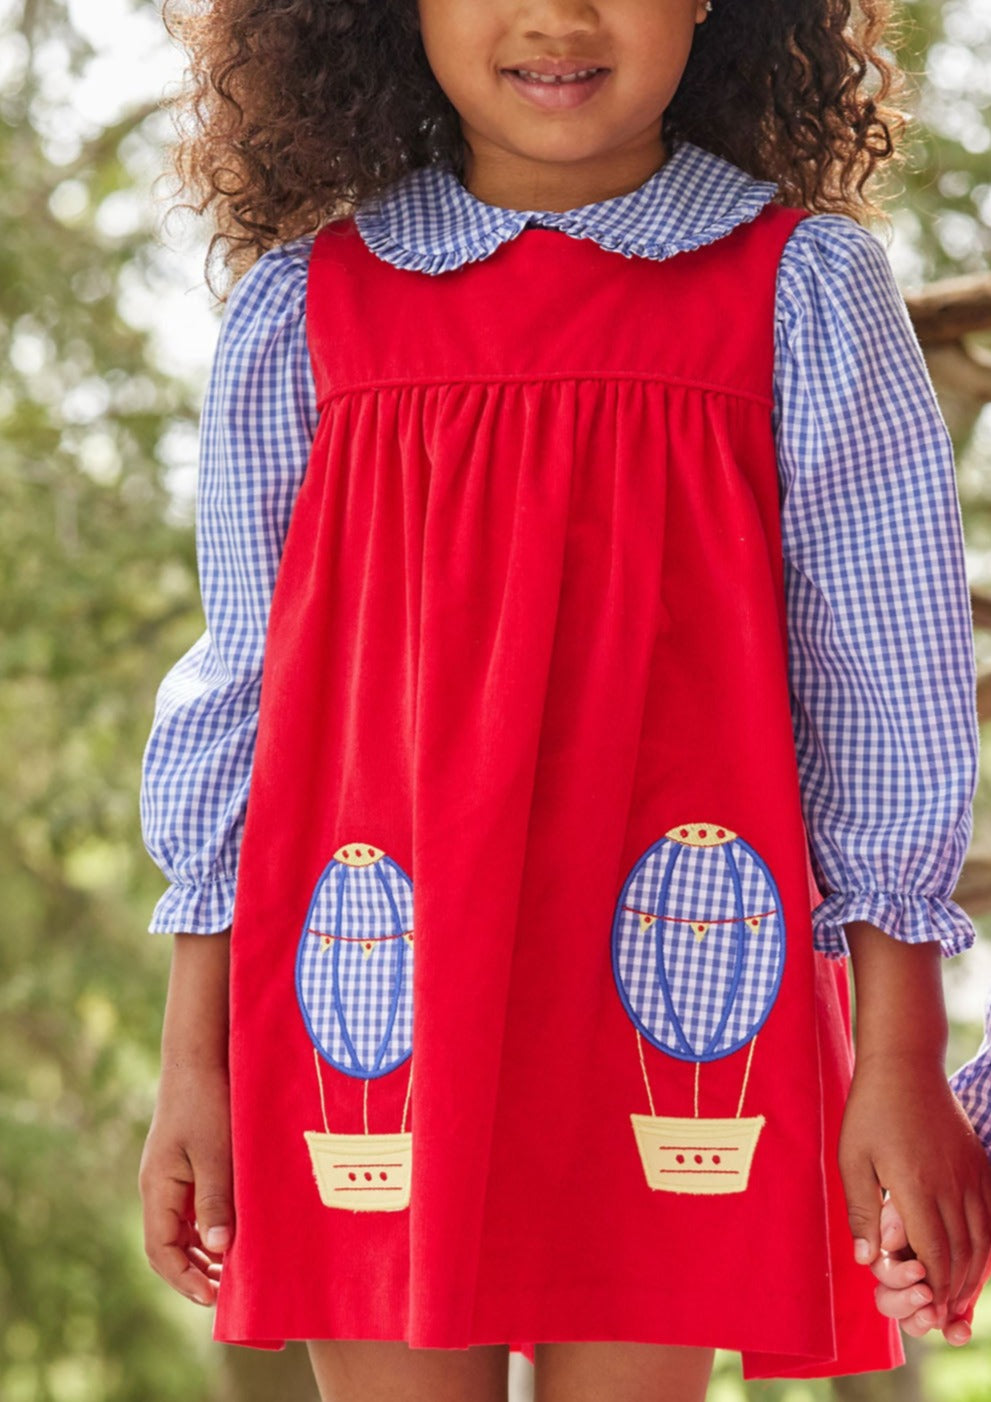 Little English classic toddler girl set with a ruffle collar peter pan shirt and a red jumper with hot air balloon embroidery at the bottom